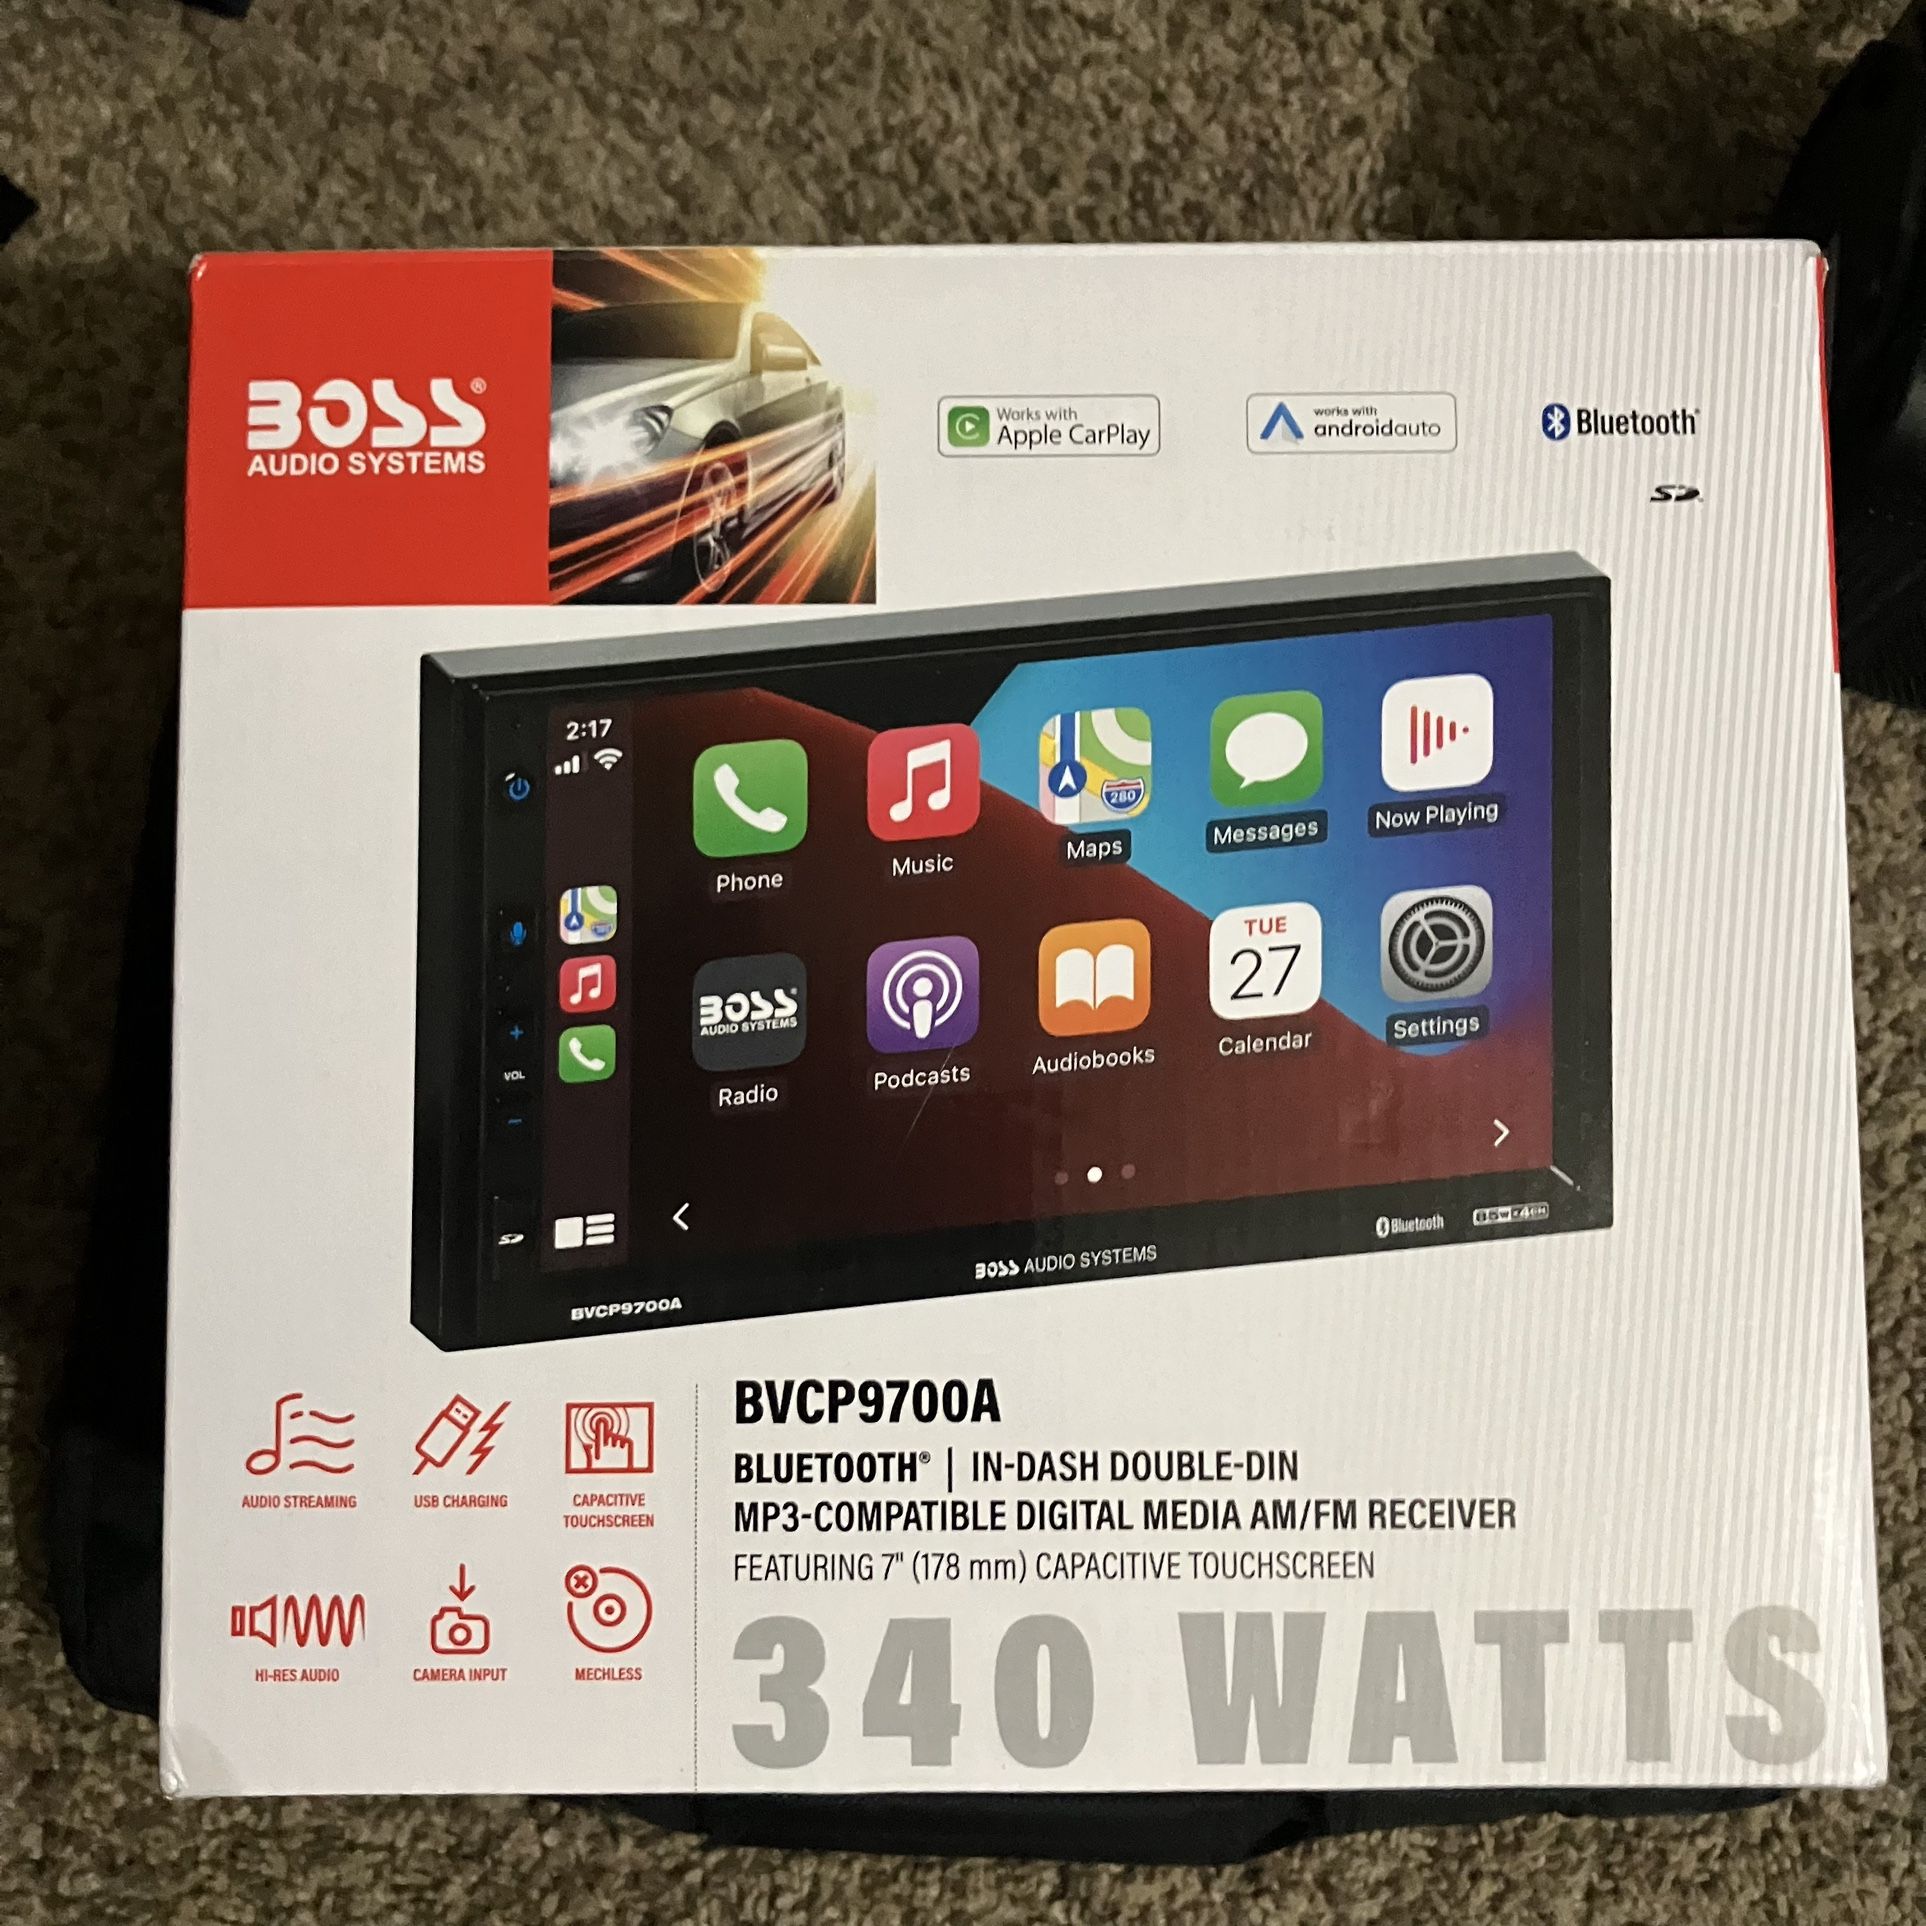 BOSS Audio Systems BVCP9700A-C Car Stereo System - Apple CarPlay, Android Auto, 7 in Screen